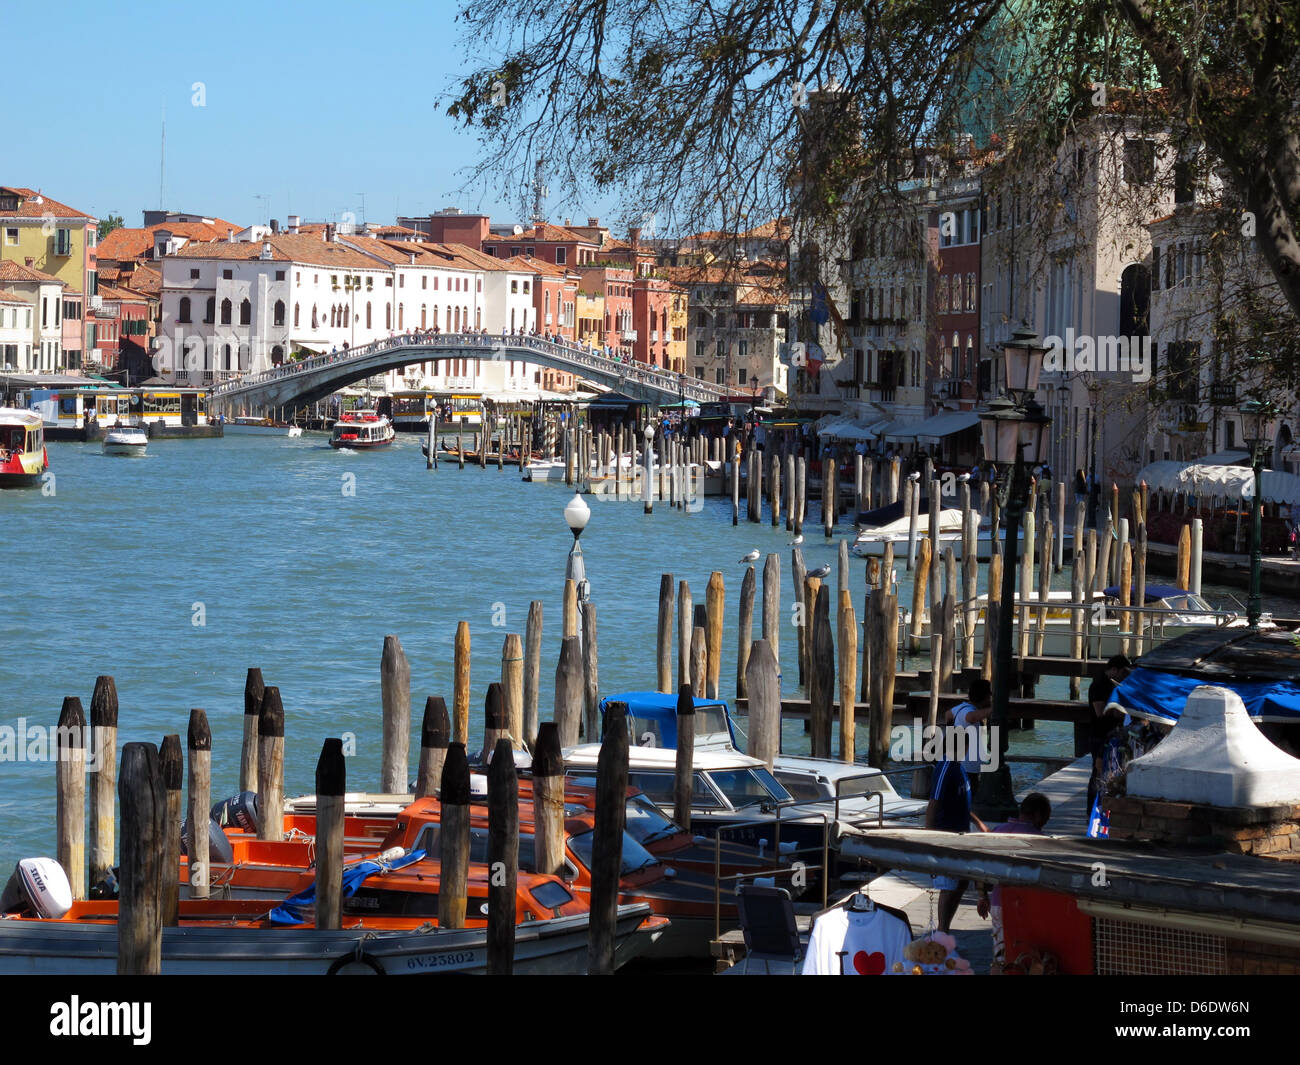 Numerous boats are visible on the Canal Grande in Venice, Italy, 07 September 2012. Photo: Jens Kalaene Stock Photo